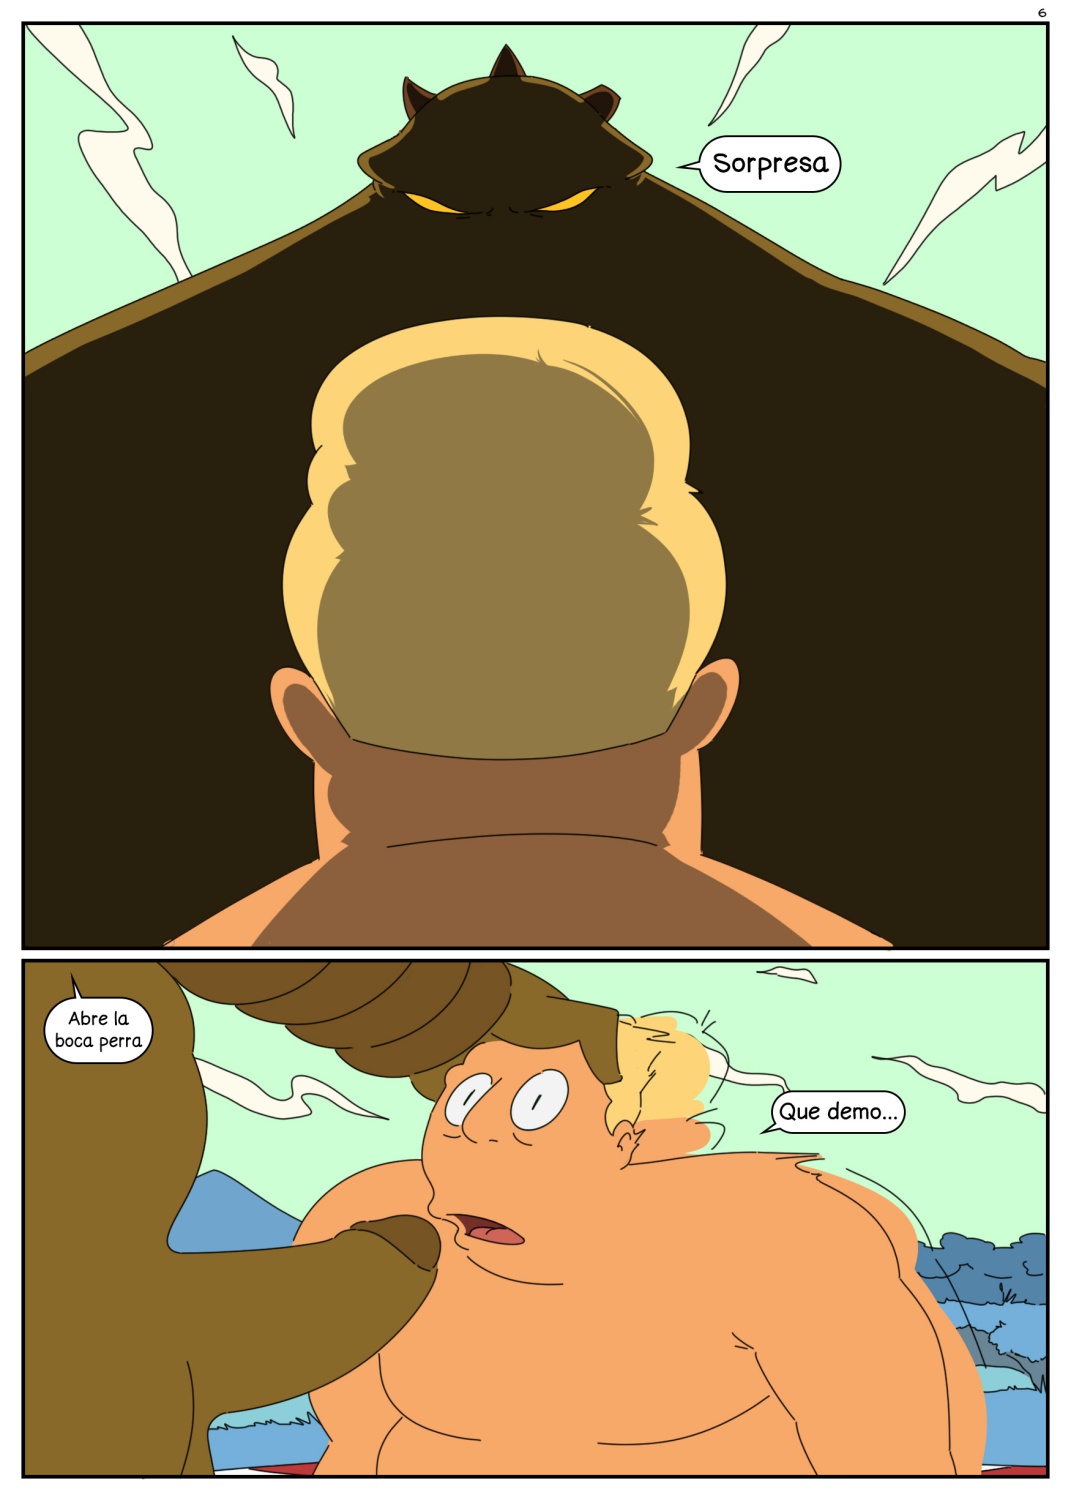 Zapp Brannigan and the Misterious Omicronian image number 6